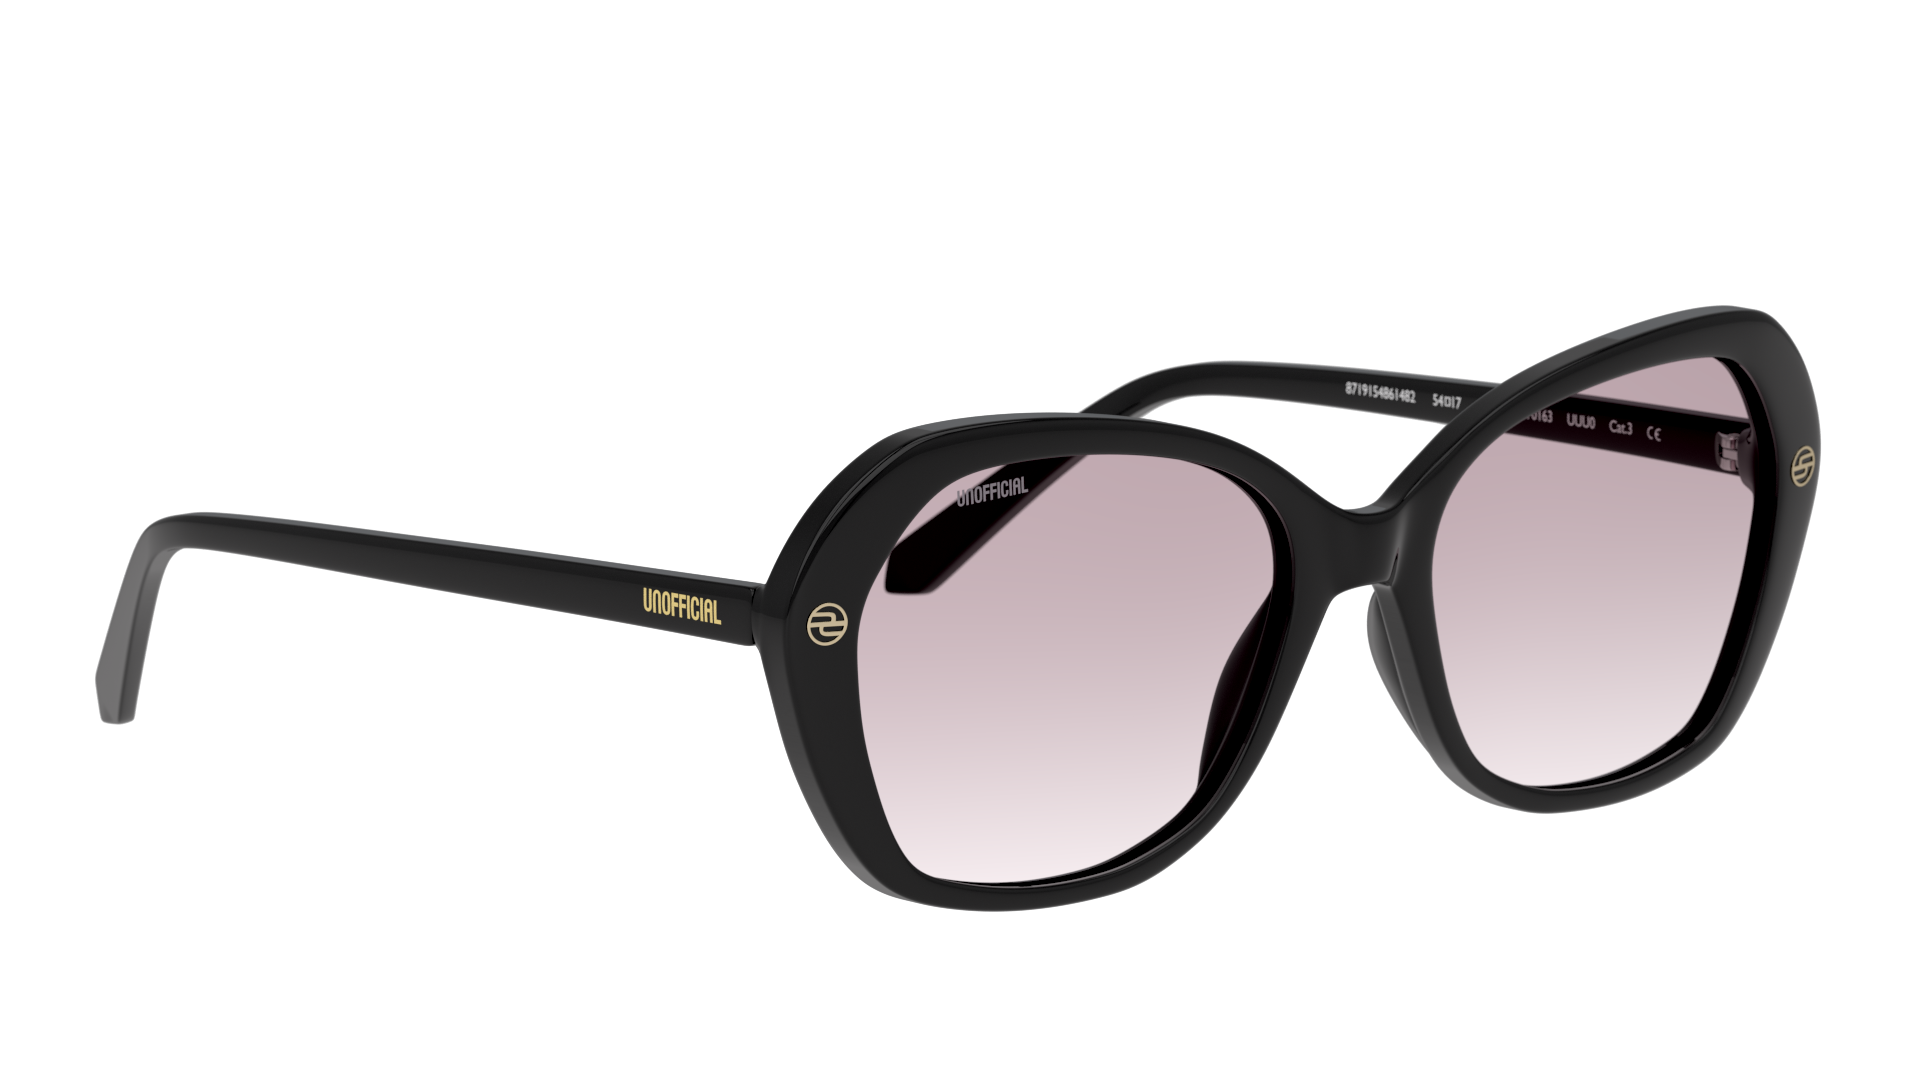 Angle_Right01 Unofficial UNSF0163 (BBG0) Sunglasses Grey / Black